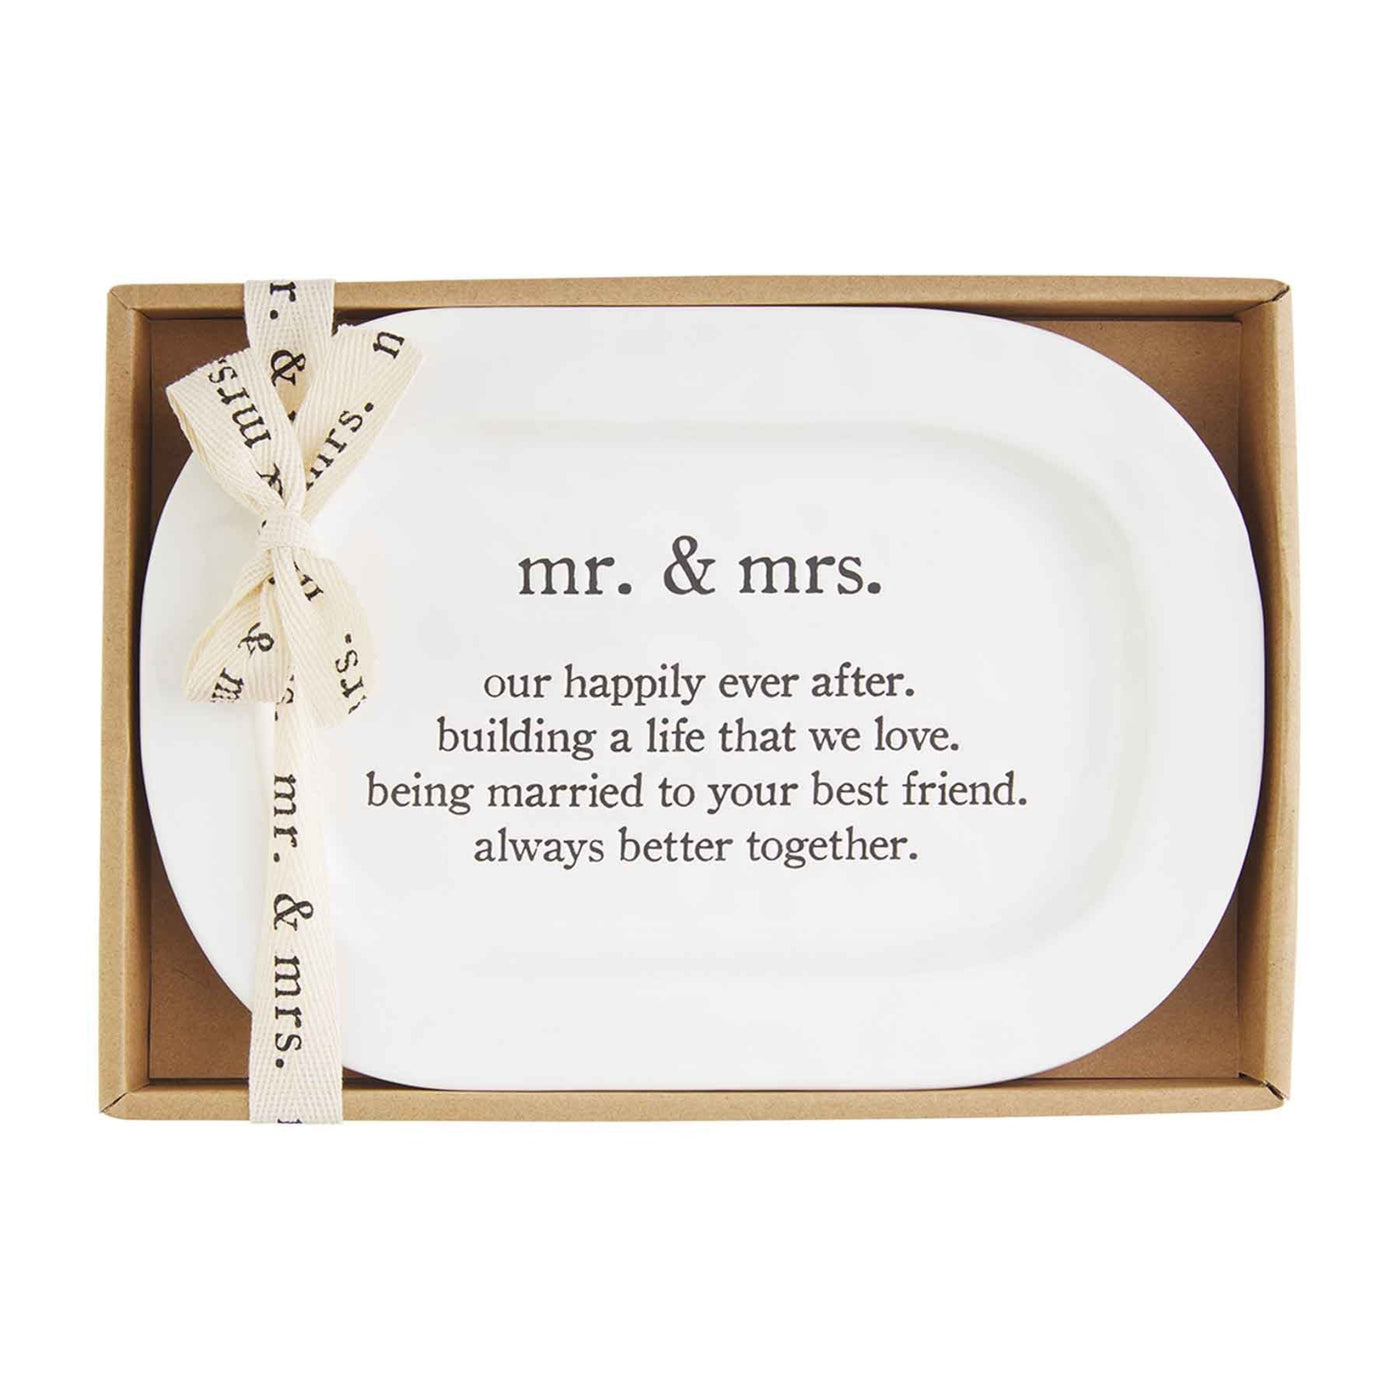 Mr. & Mrs. Happily Ever After Plate